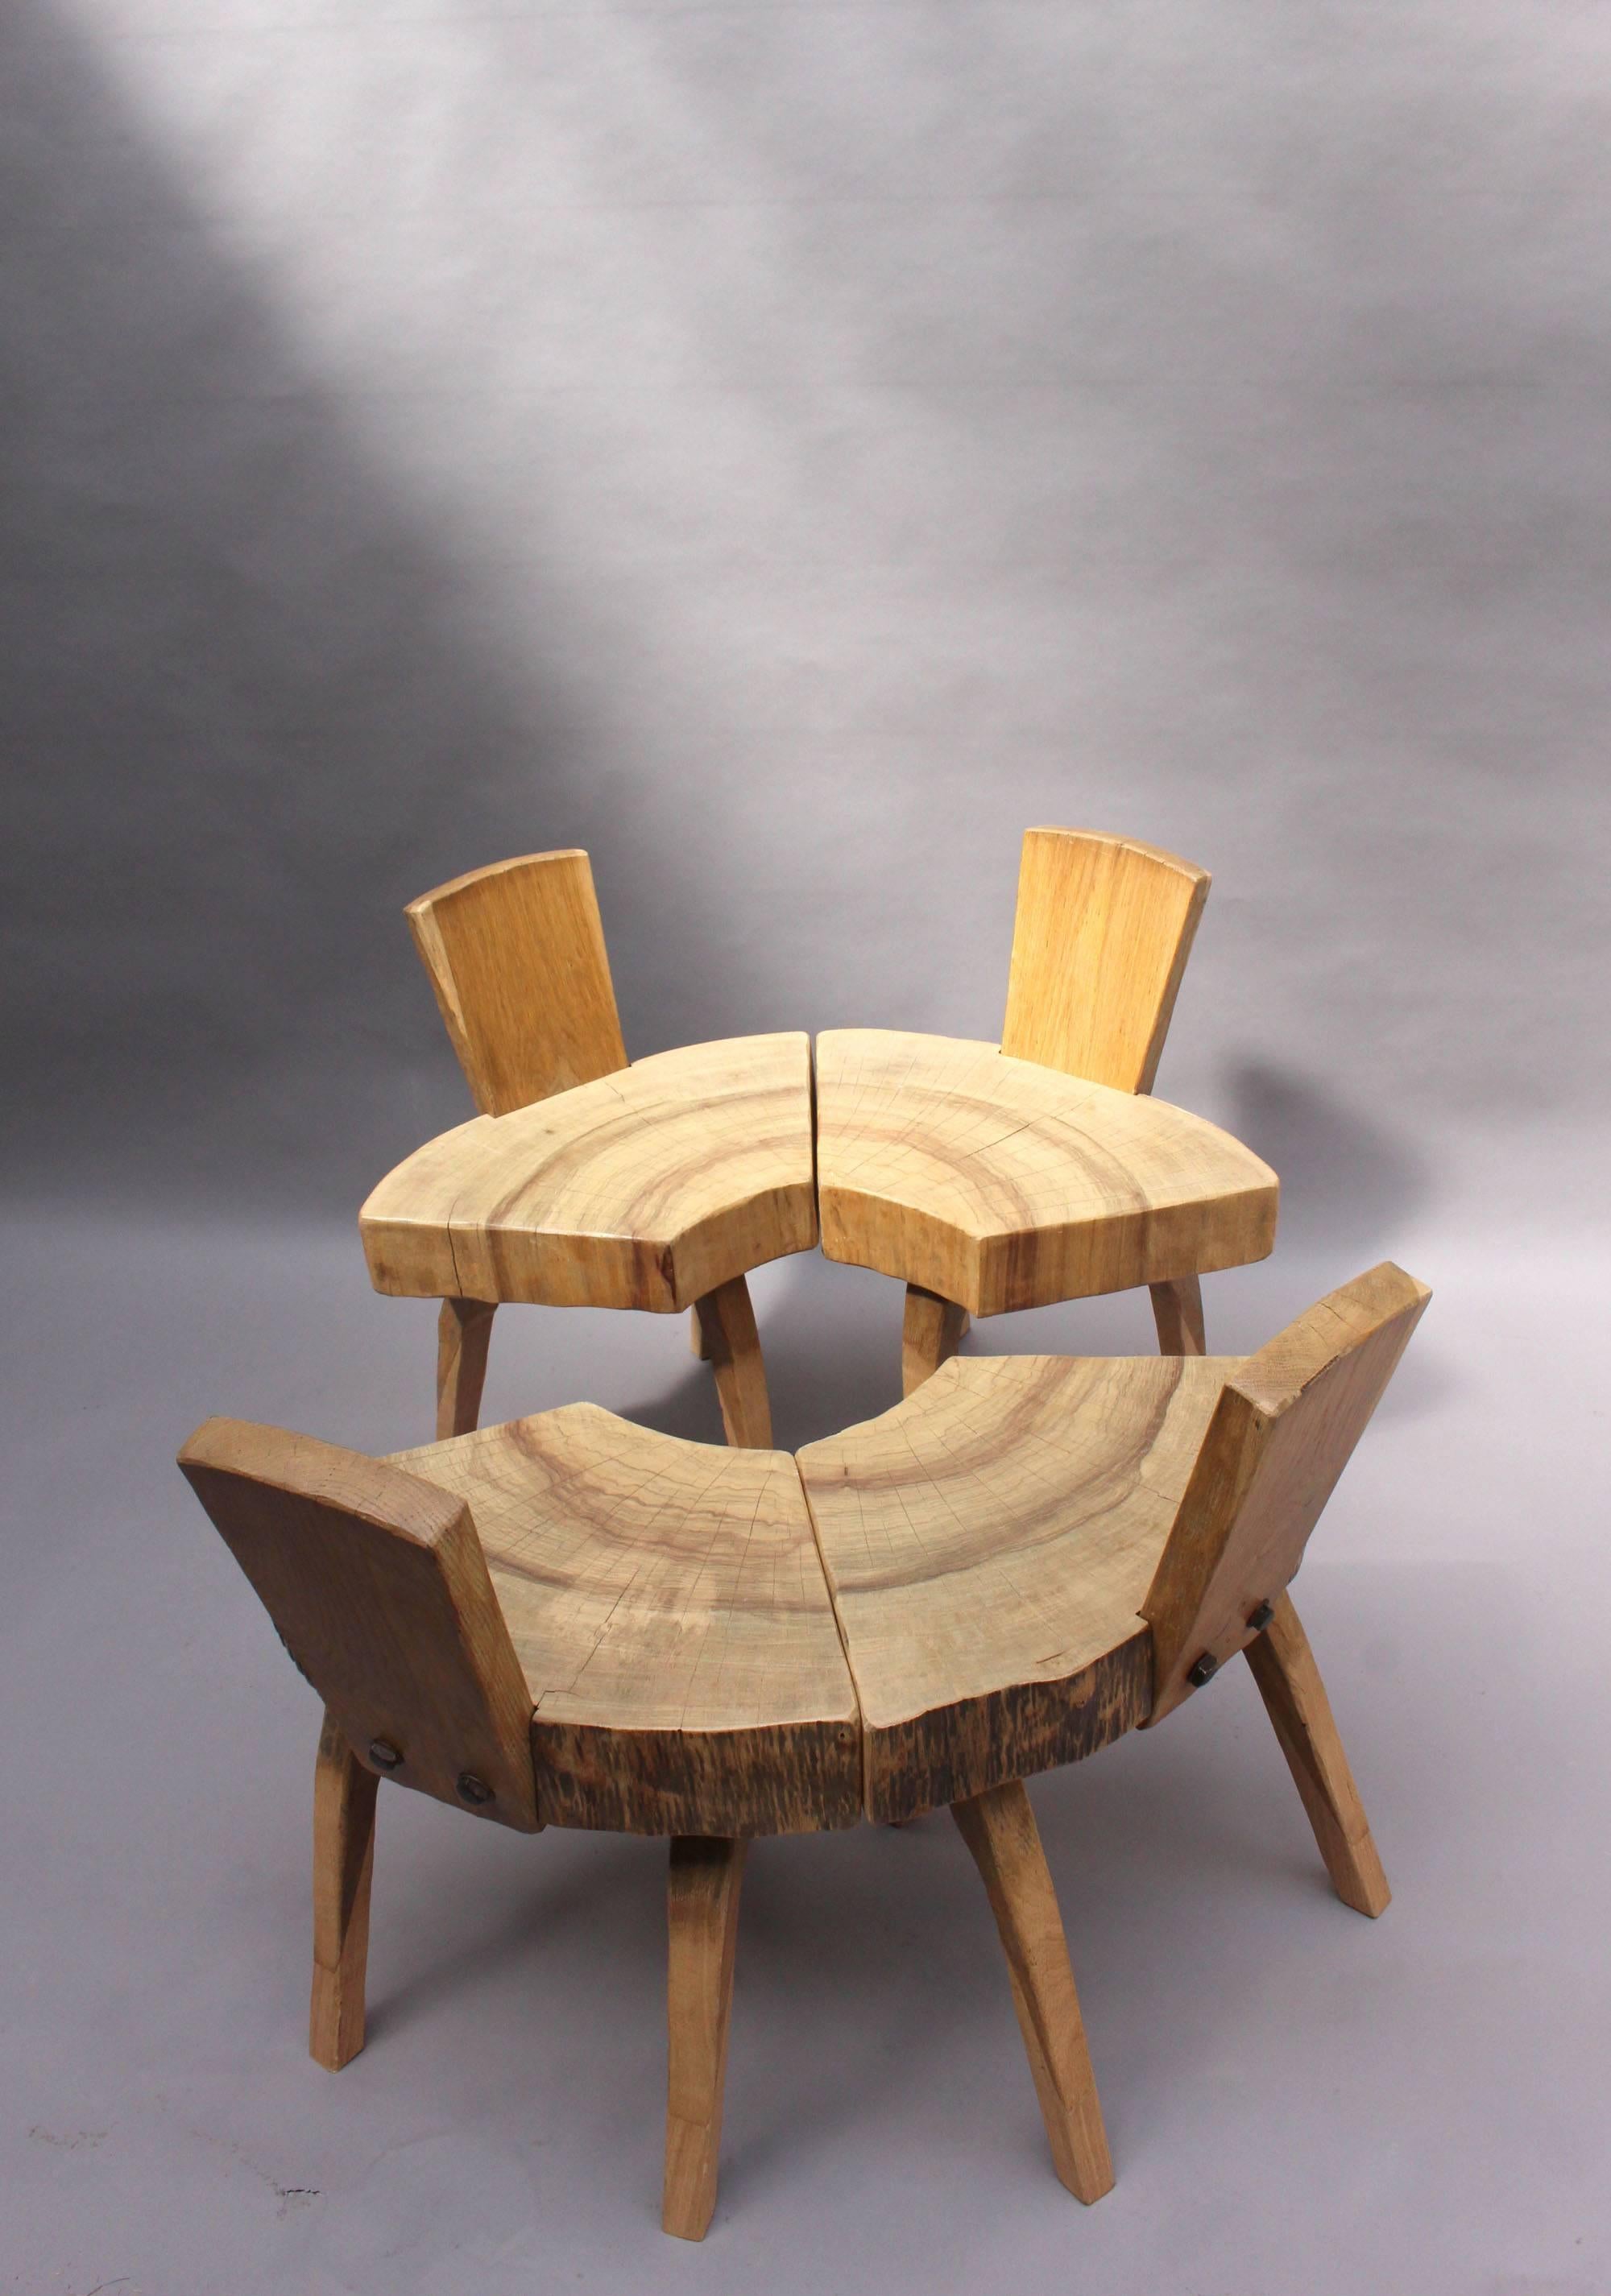 Four Mid-Century organic oak chairs with a tree trunk slice seat on three legs and metal details.

Price is per chair.